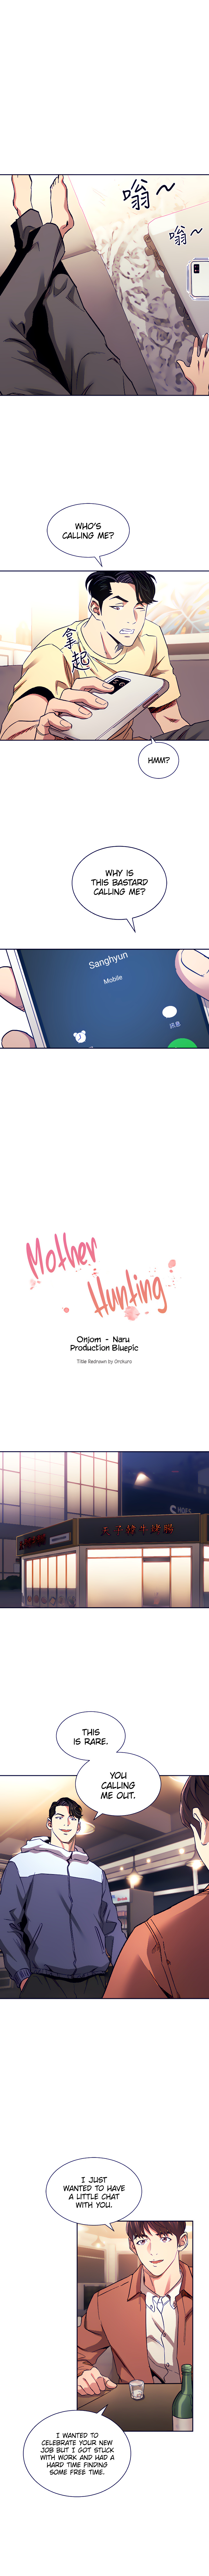 Mother Hunting - Page 2